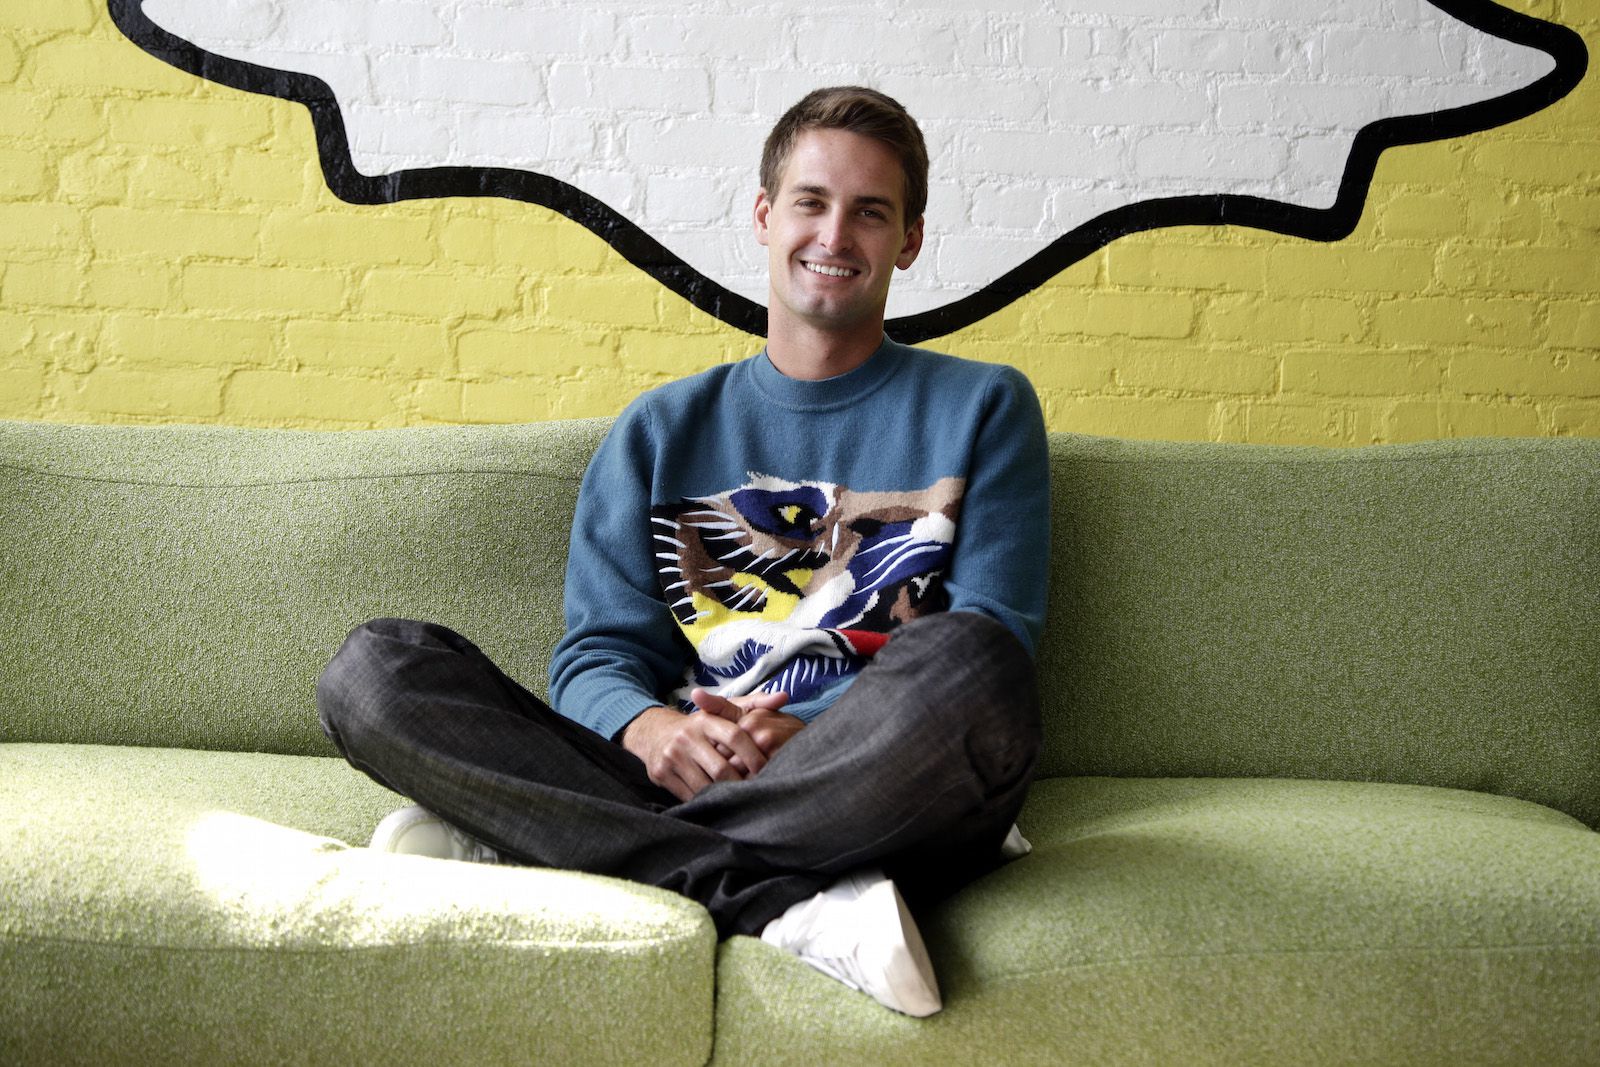 Snapchat wants to manage your money